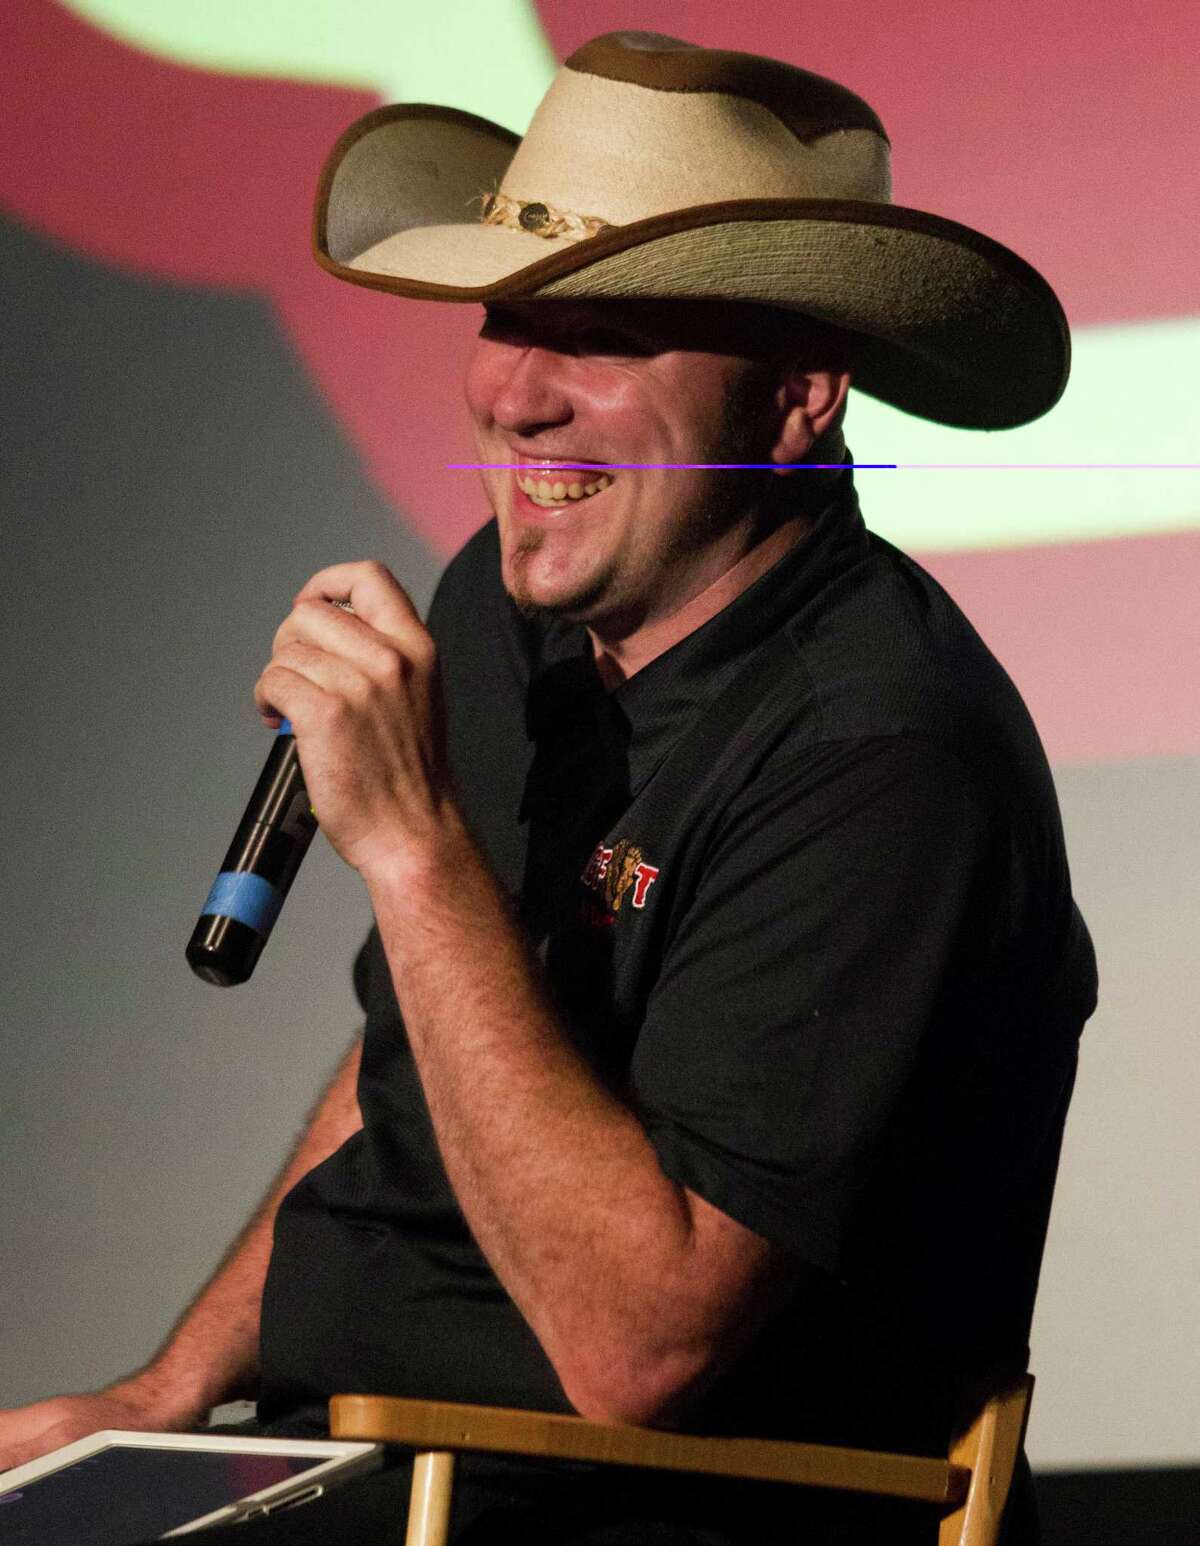 Rick Dyer takes questions from the audience at Monday night's show at the Alamo Drafthouse in Katy.